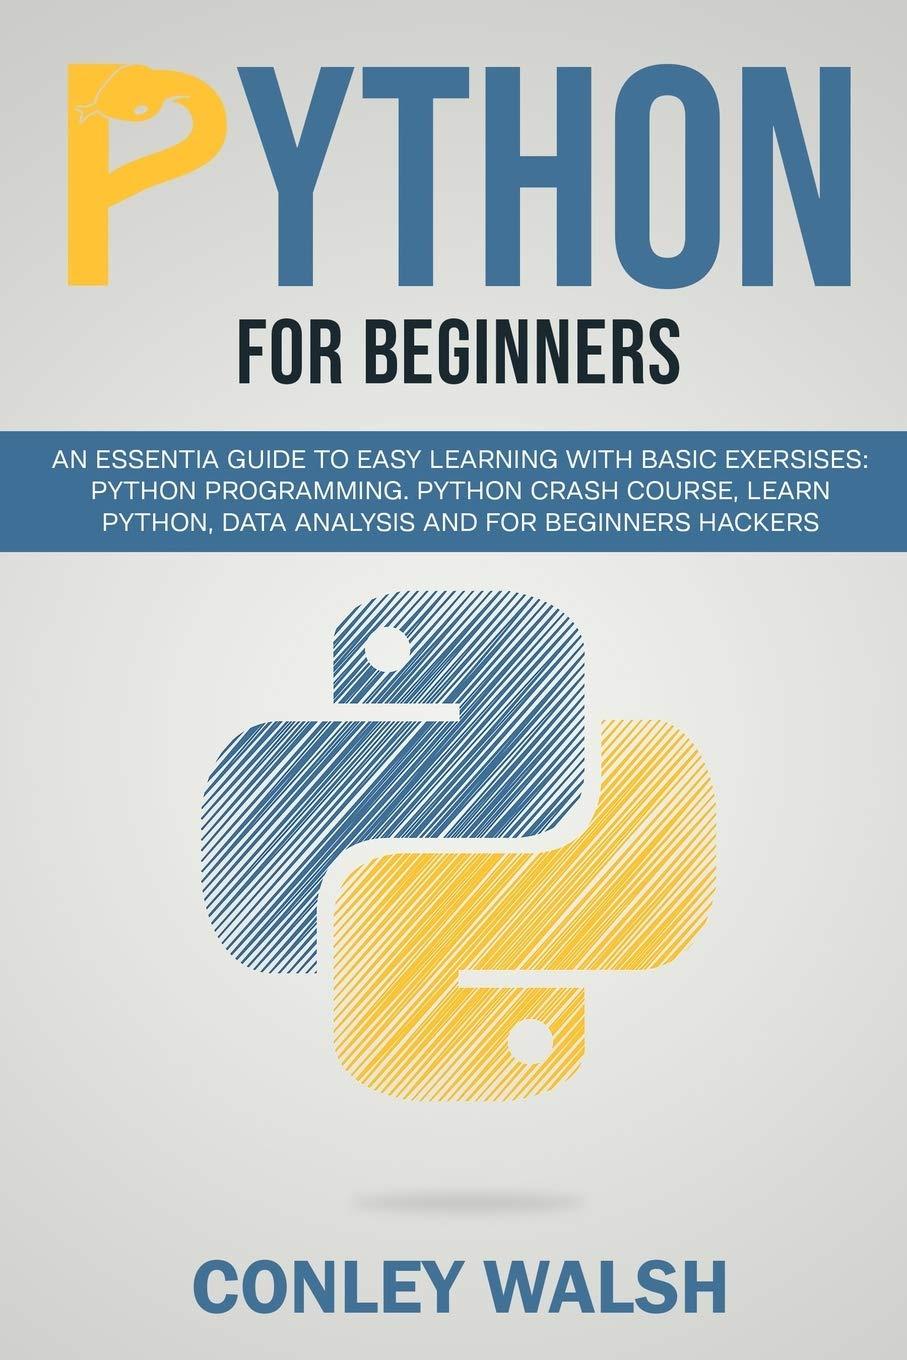 Python For Beginners An Essential Guide To Learn With Basic Exercises Python Programming Crash Course For Data Analysis And For Beginner Hacker